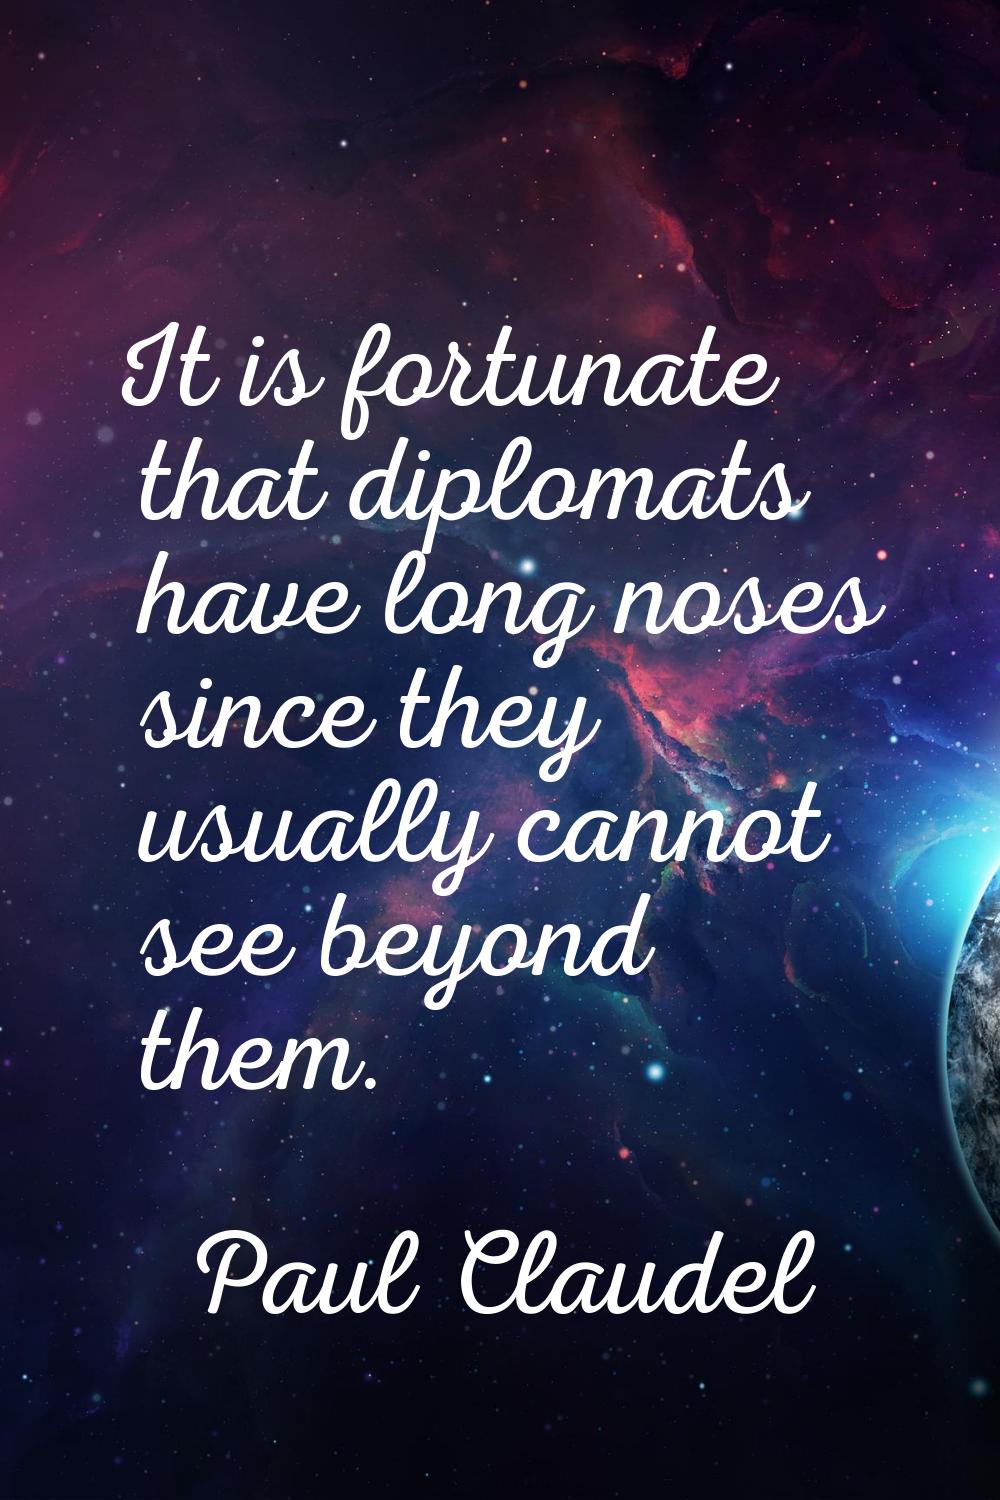 It is fortunate that diplomats have long noses since they usually cannot see beyond them.